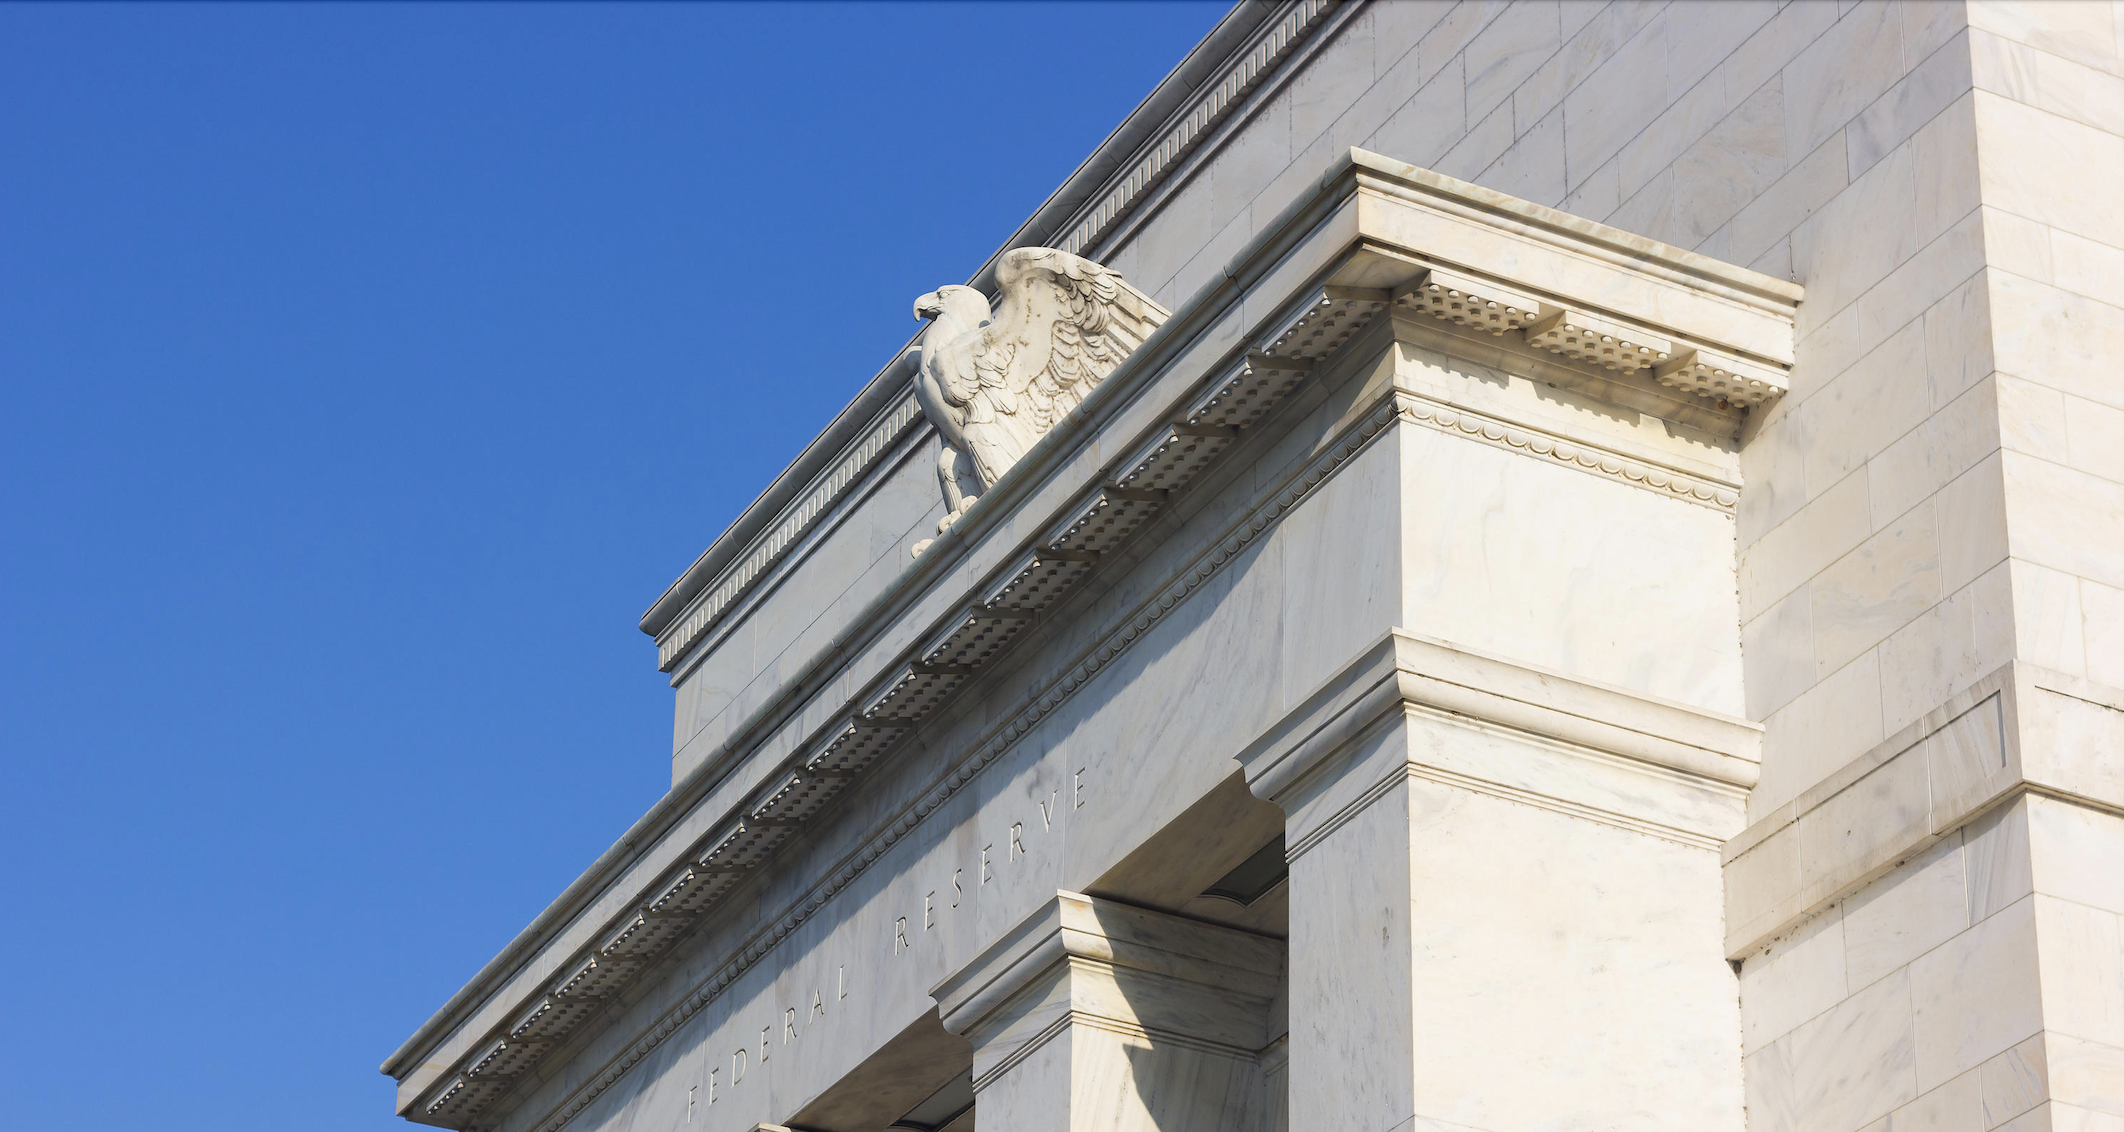 Federal Reserve Building in Washington, DC. Alamy Stock Photo